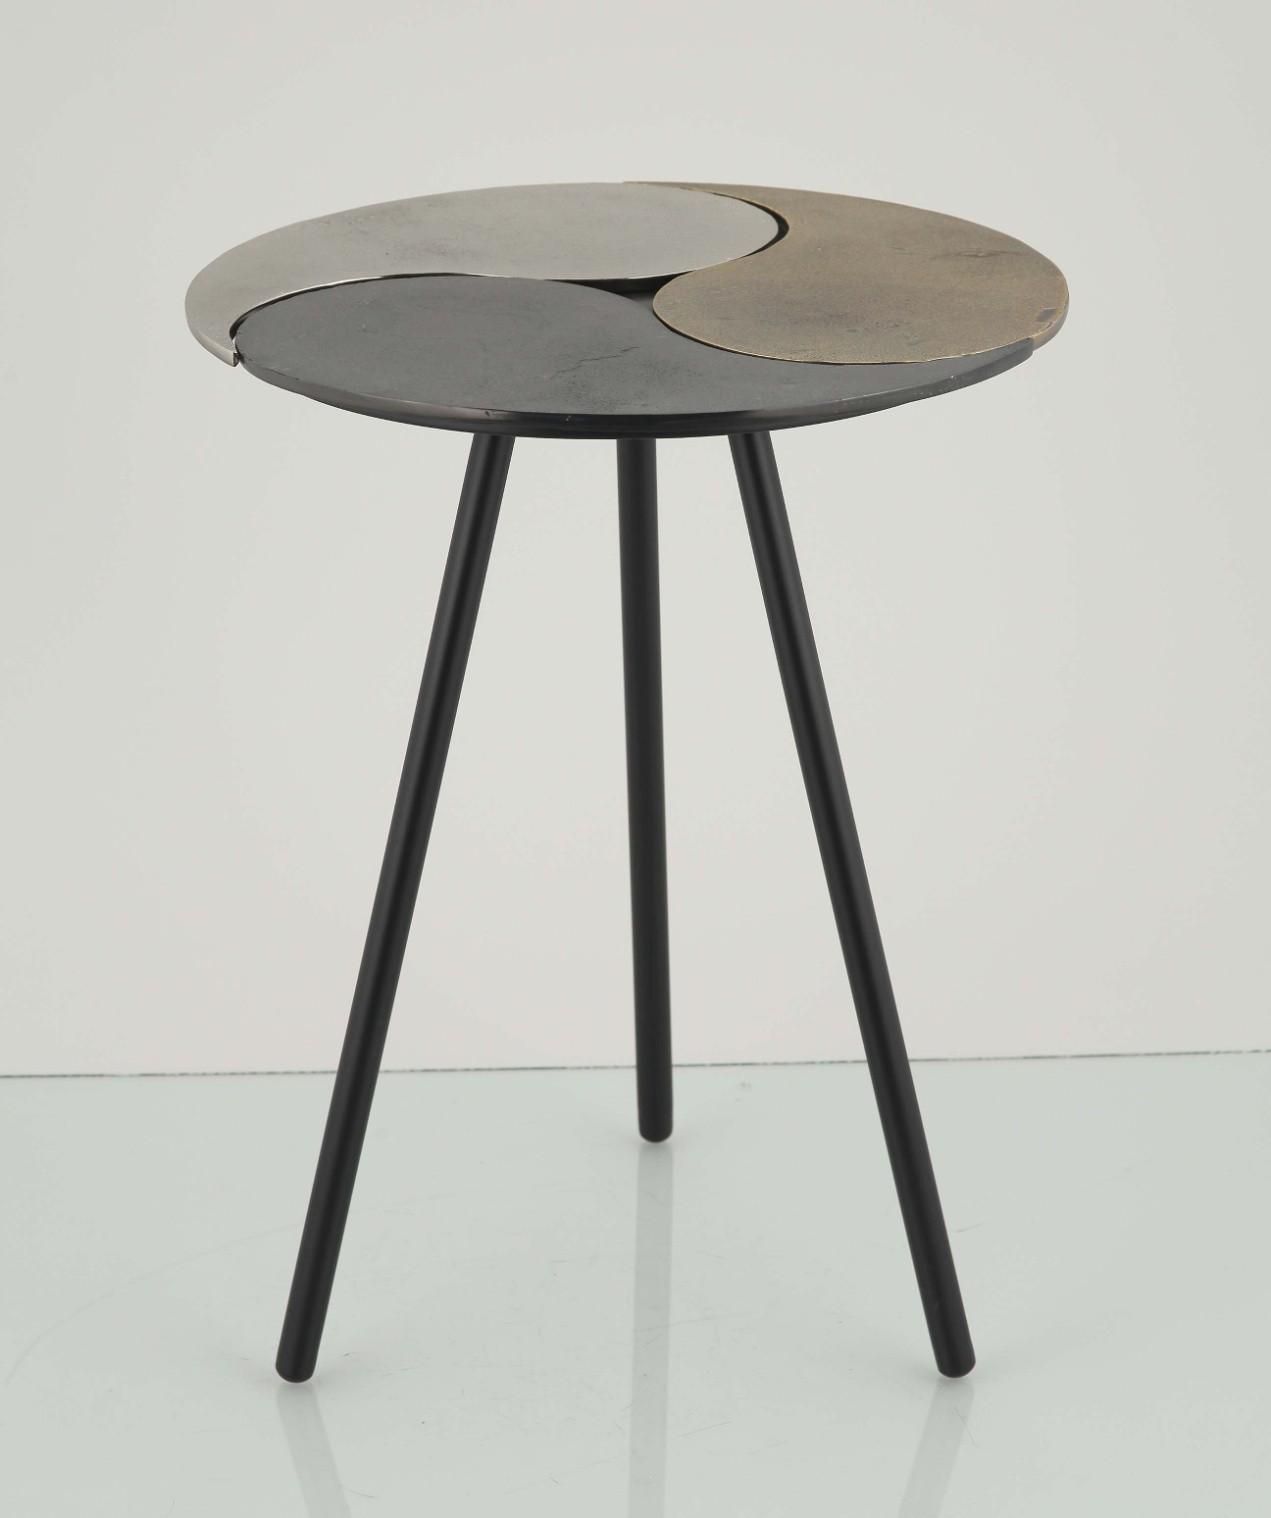 Round Side Table, Metal End Table, Nightstand/Small Tables For Living Room, Accent  Tables, Side Table For Small Spaces – Black || Rural Handmade Redefine  Supply To Build Sustainable Brands For Metal Side Tables For Living Spaces (View 15 of 15)